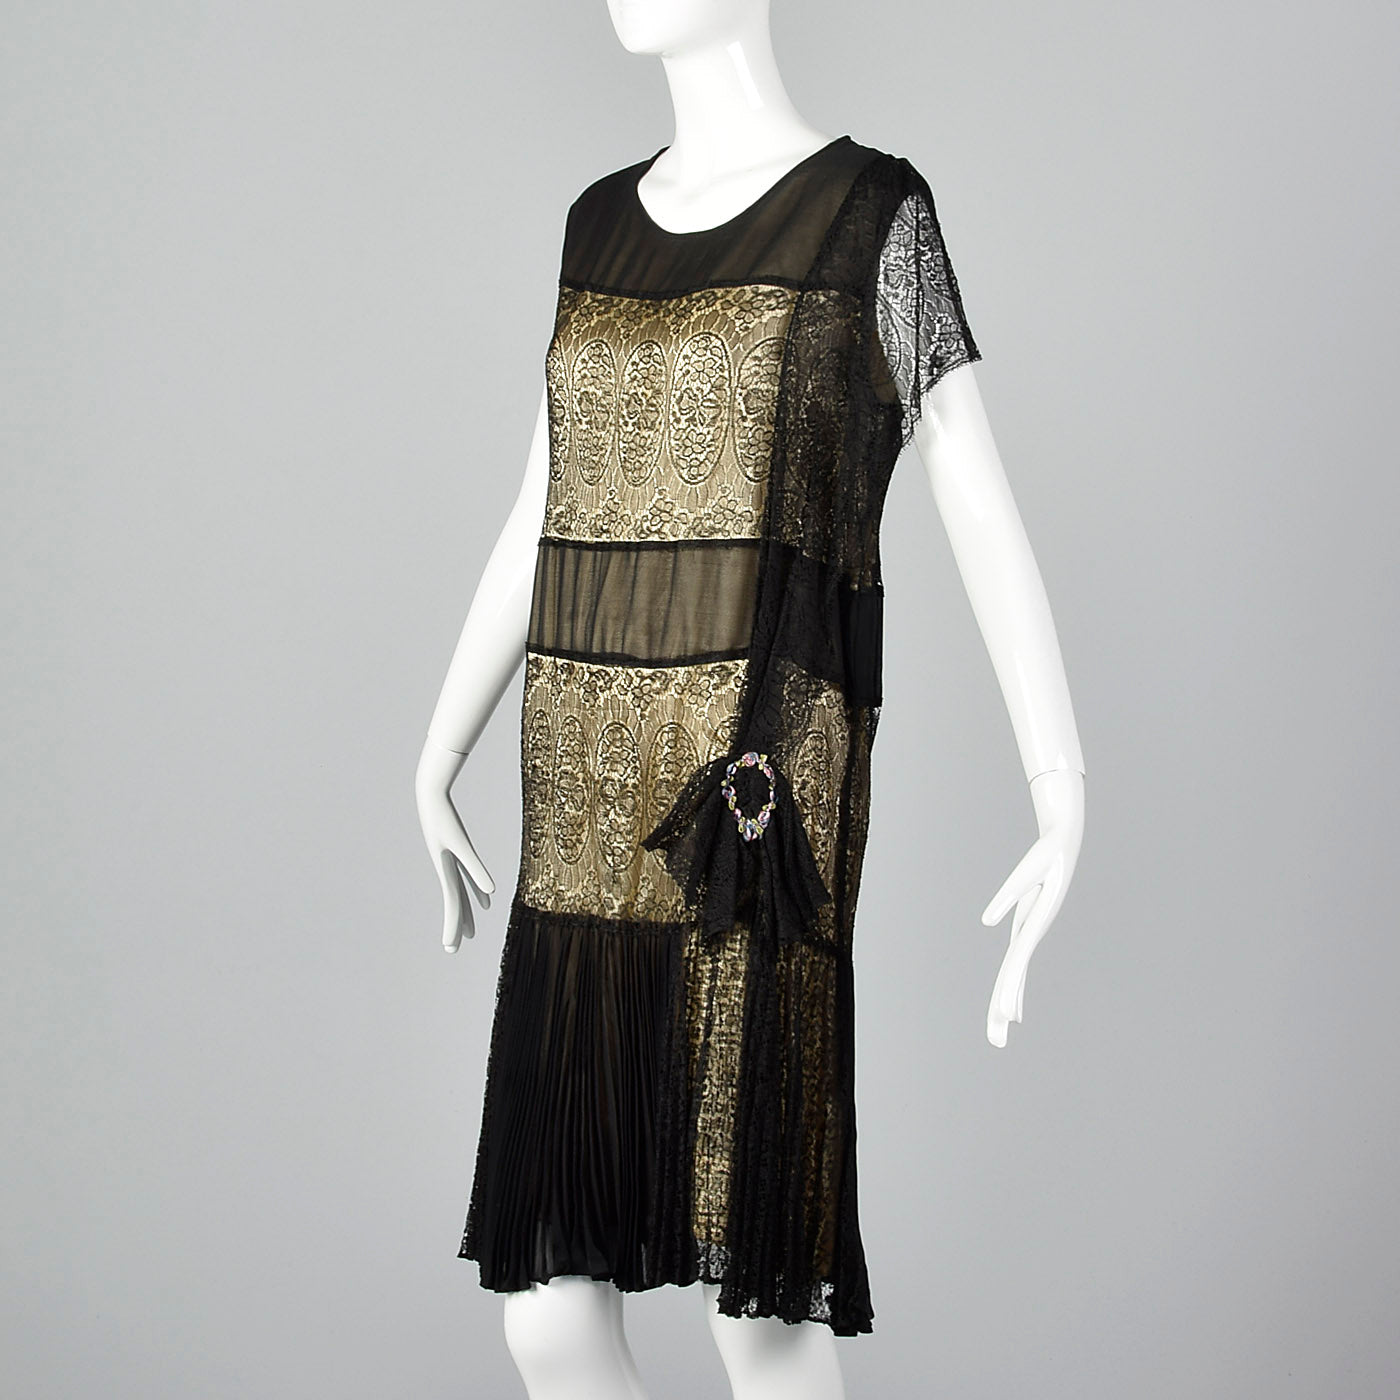 1920s Gorgeous Black Lace Overlay Dress